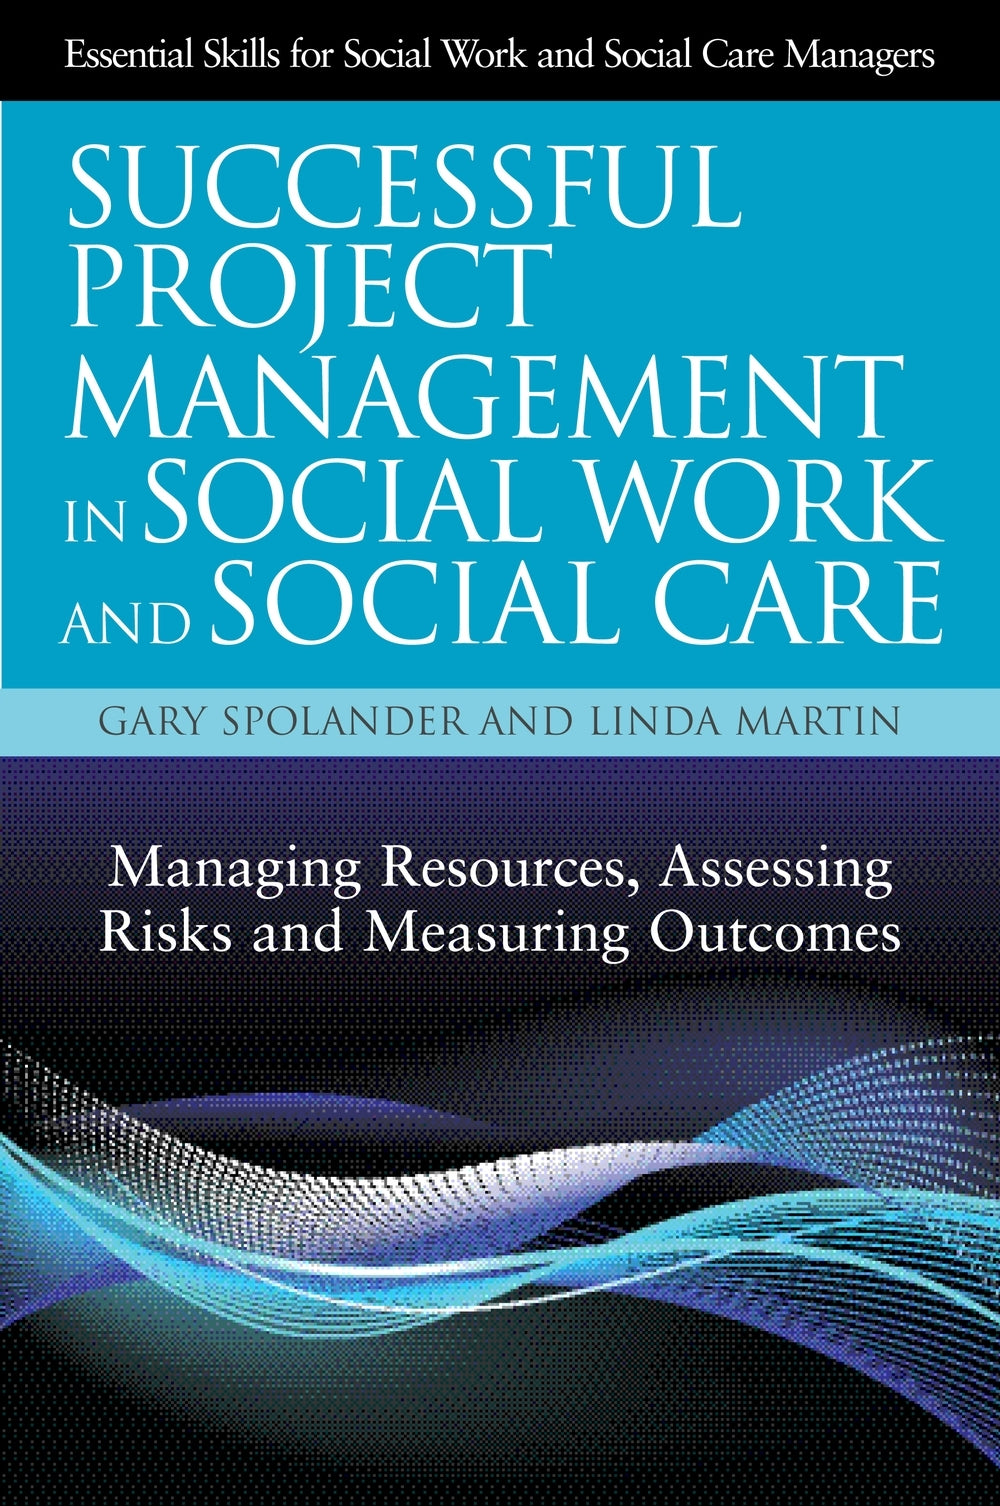 Successful Project Management in Social Work and Social Care by Gary Spolander, Linda Martin, Trish Hafford-Letchfield